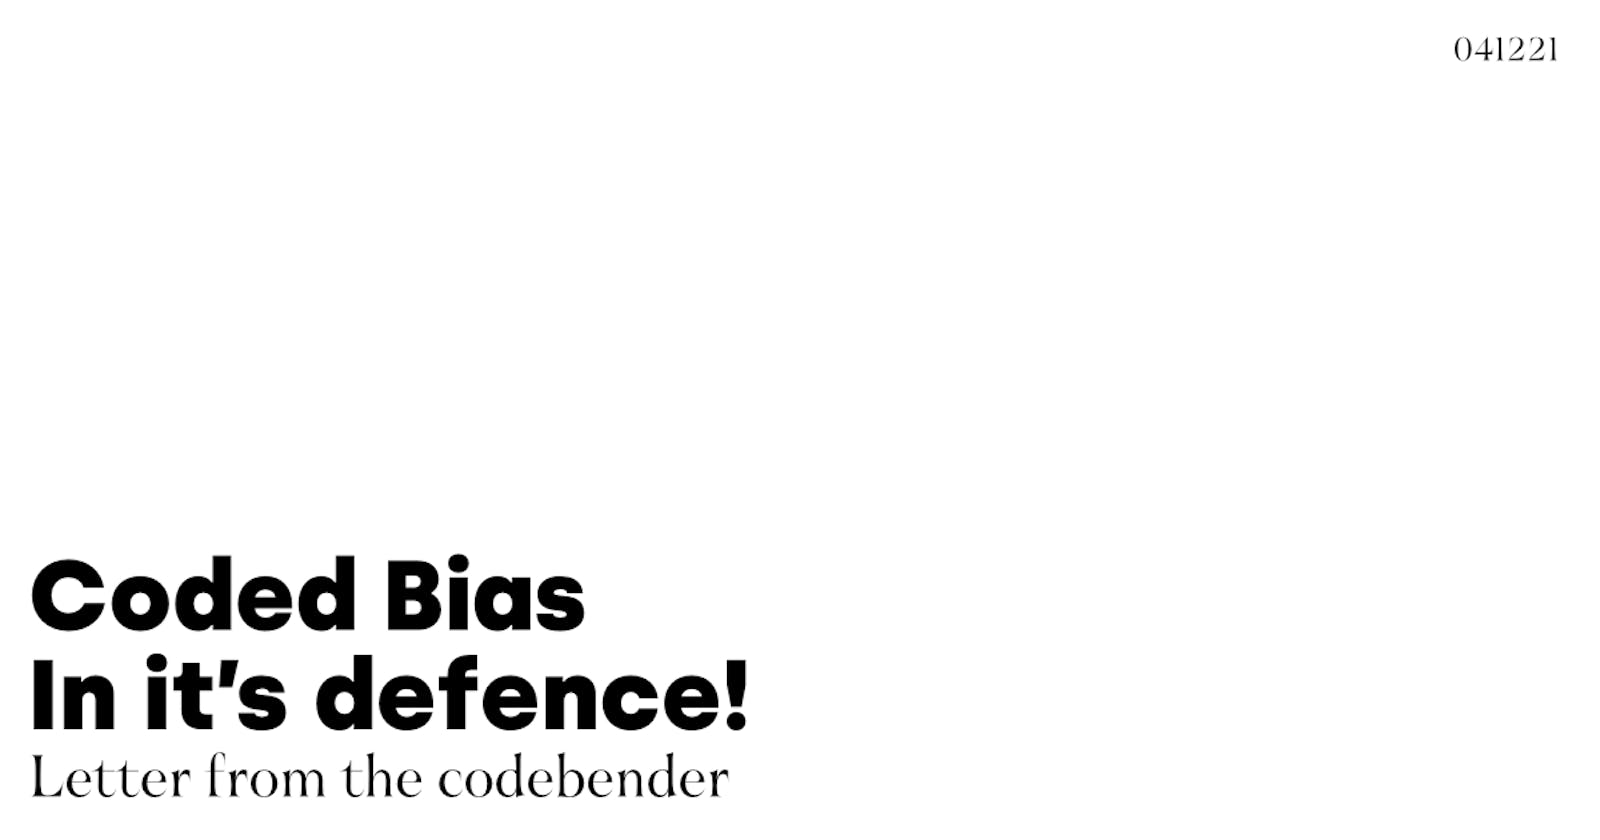 Coded Bias, In its defence